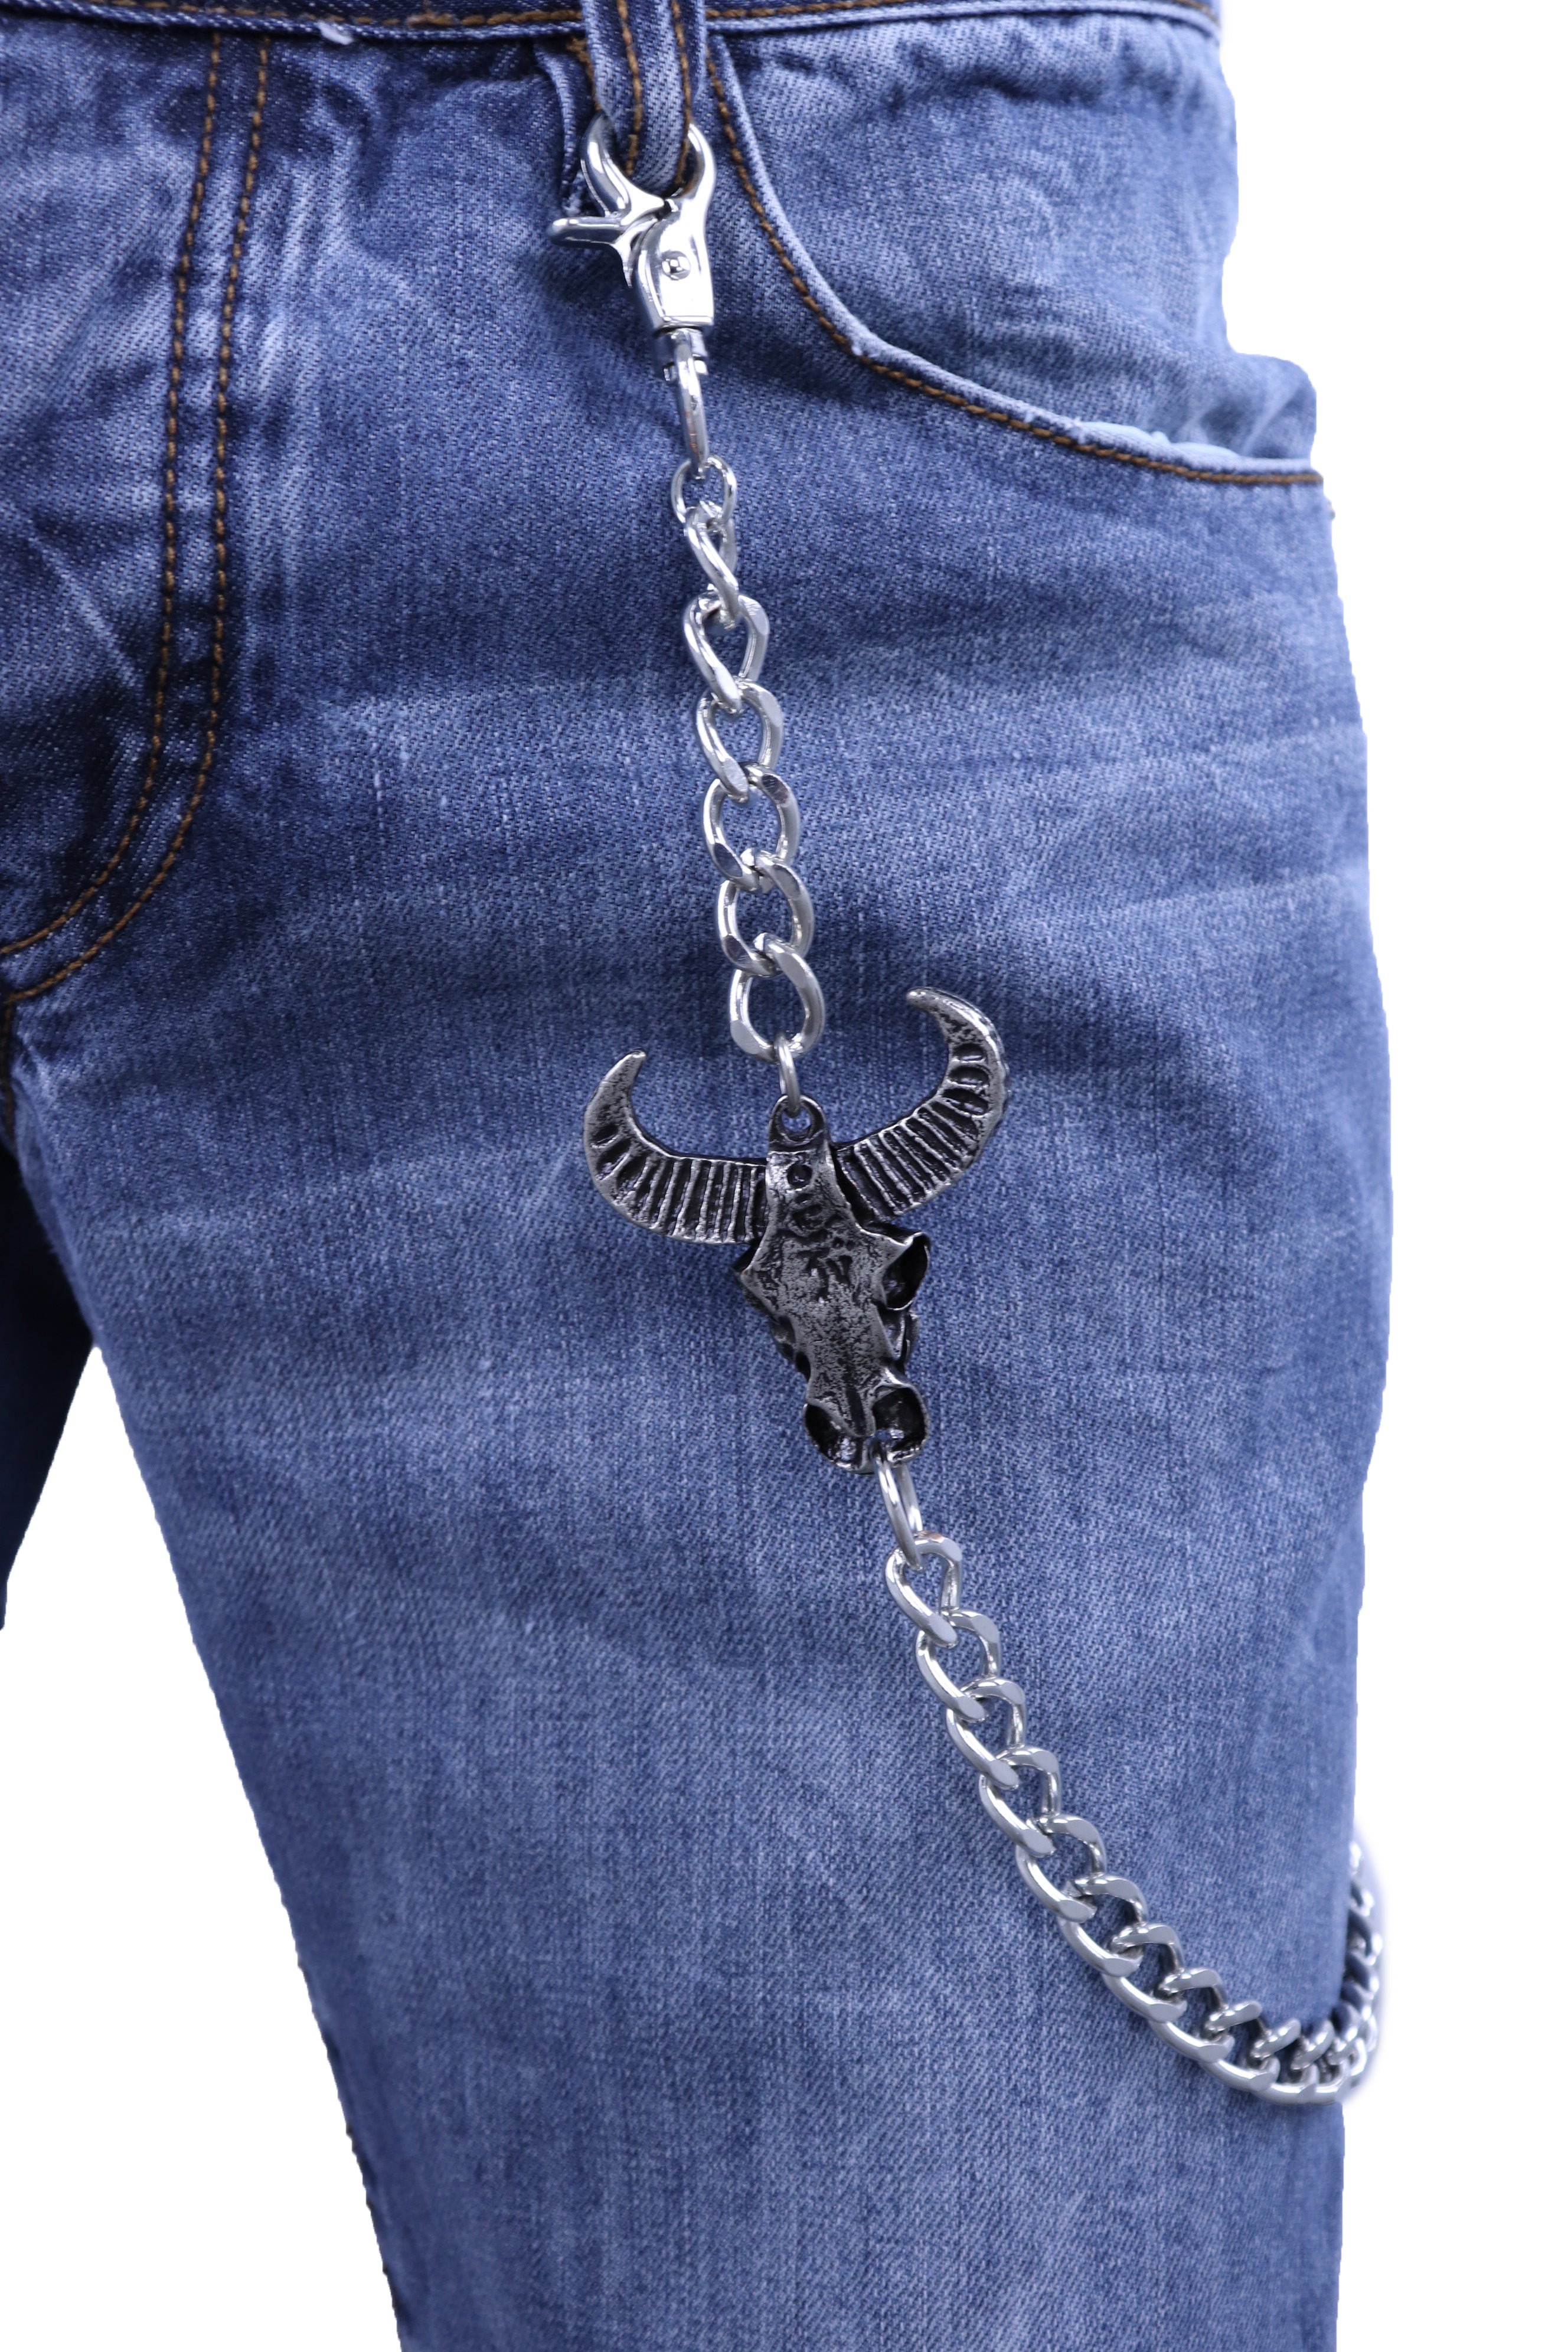 21 Double Strand Wallet Chain - Black